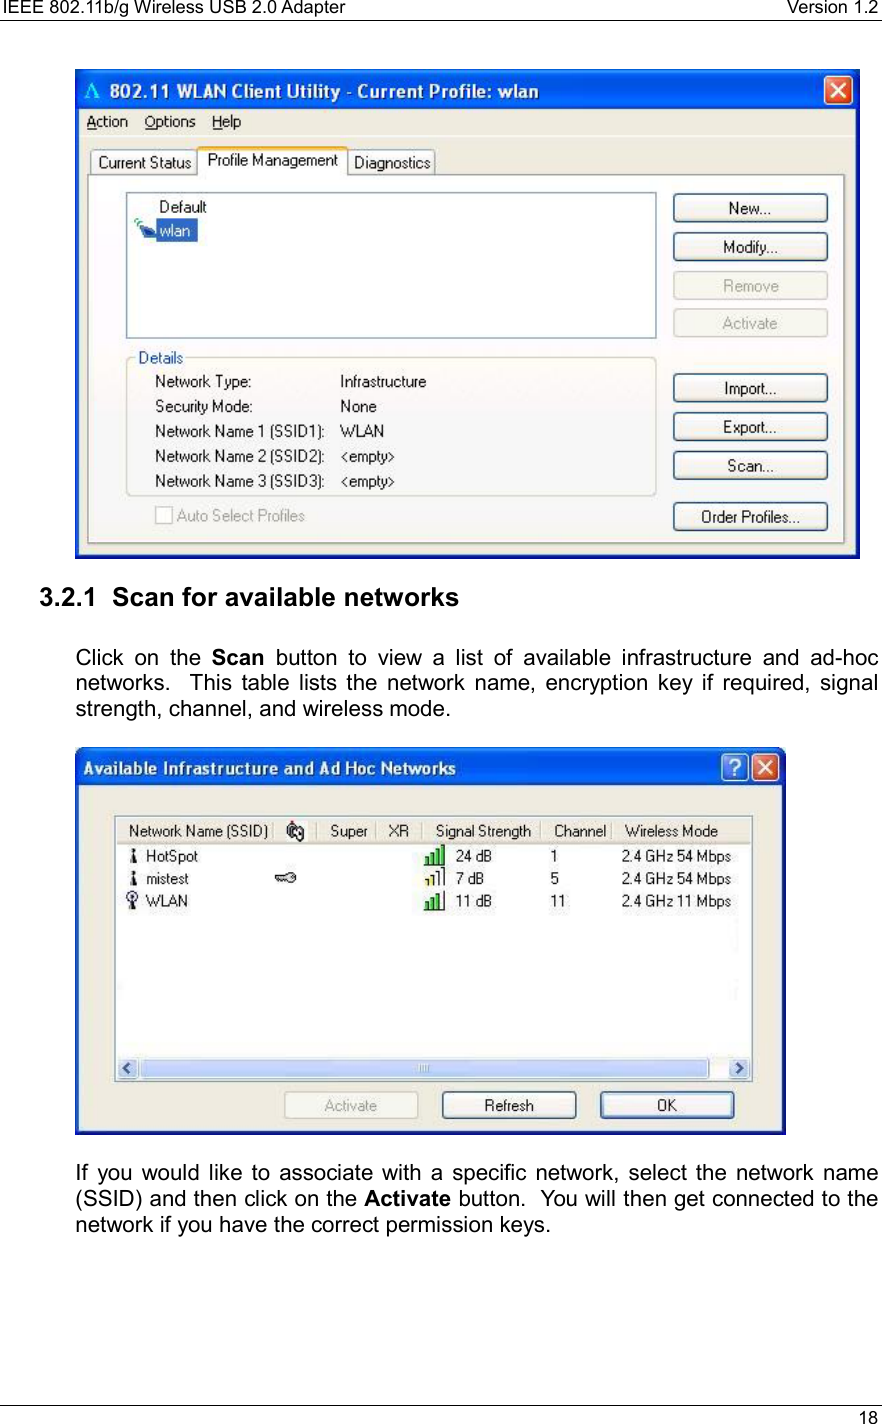 IEEE 802.11b/g Wireless USB 2.0 Adapter    Version 1.2   18   3.2.1 Scan for available networks  Click on the Scan button to view a list of available infrastructure and ad-hoc networks.  This table lists the network name, encryption key if required, signal strength, channel, and wireless mode.      If you would like to associate with a specific network, select the network name (SSID) and then click on the Activate button.  You will then get connected to the network if you have the correct permission keys.    